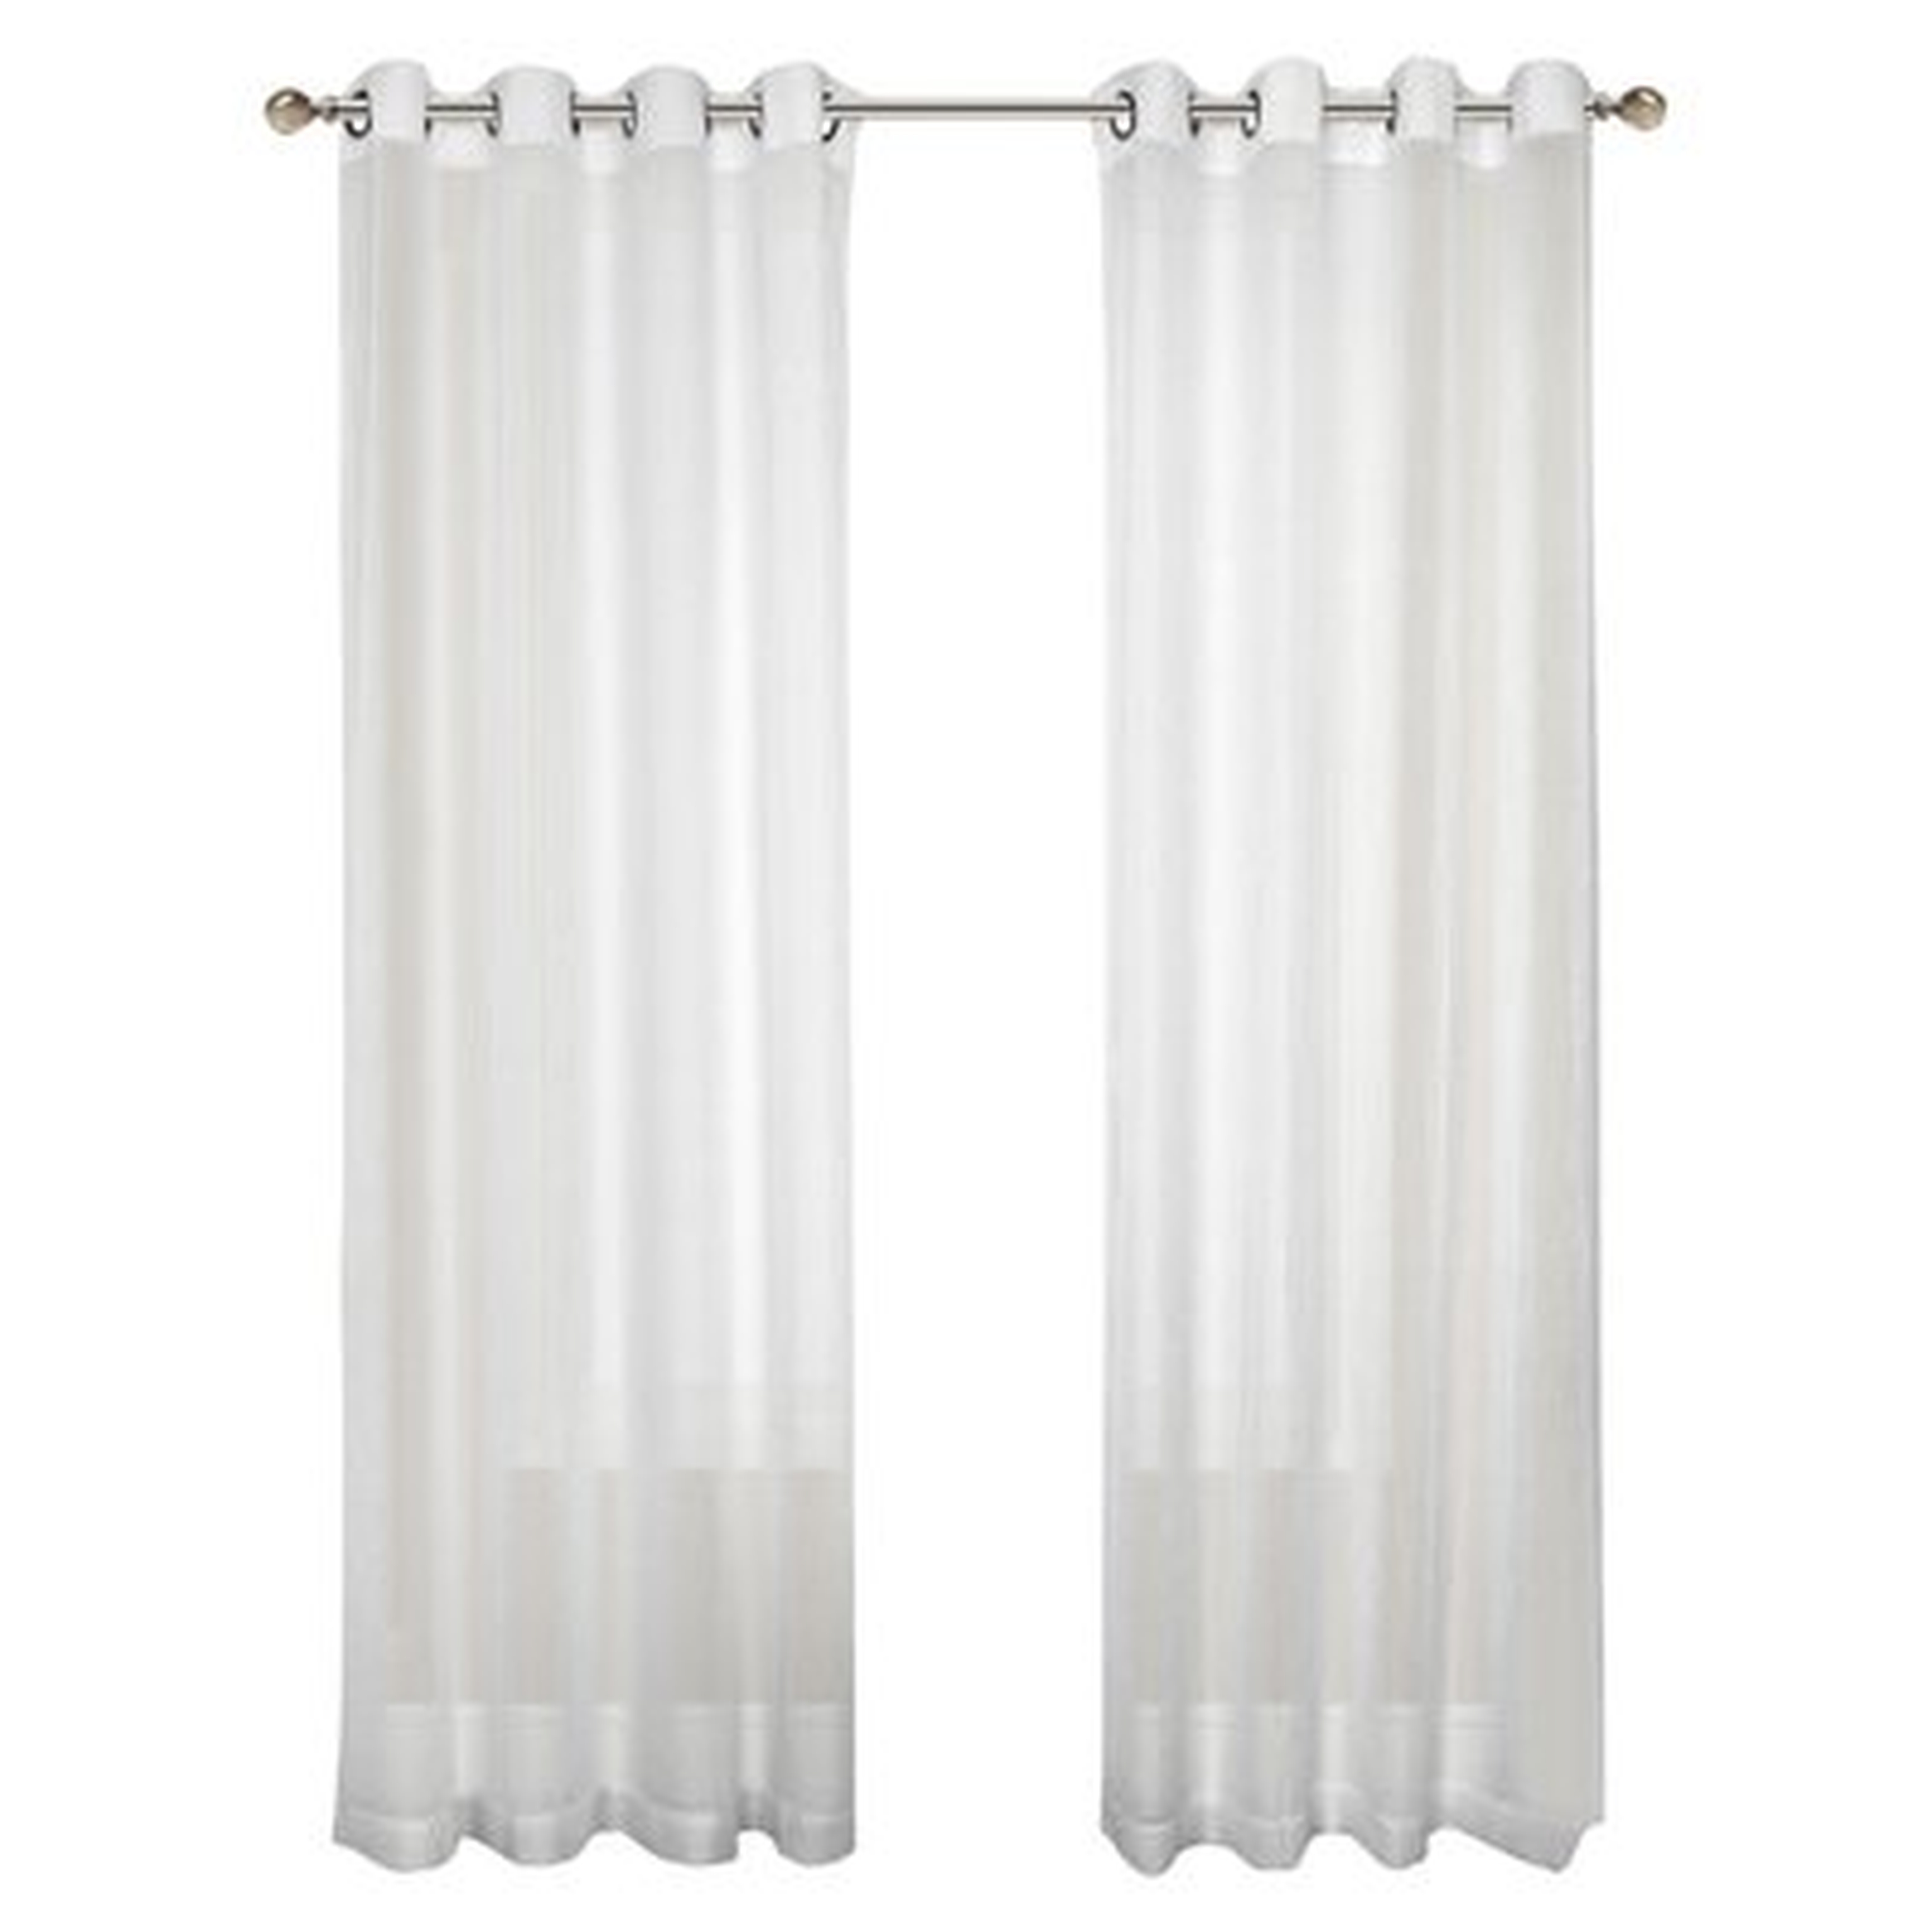 Ortley Crushed Voile Solid Sheer Grommet Curtain Panel Pair - Birch Lane